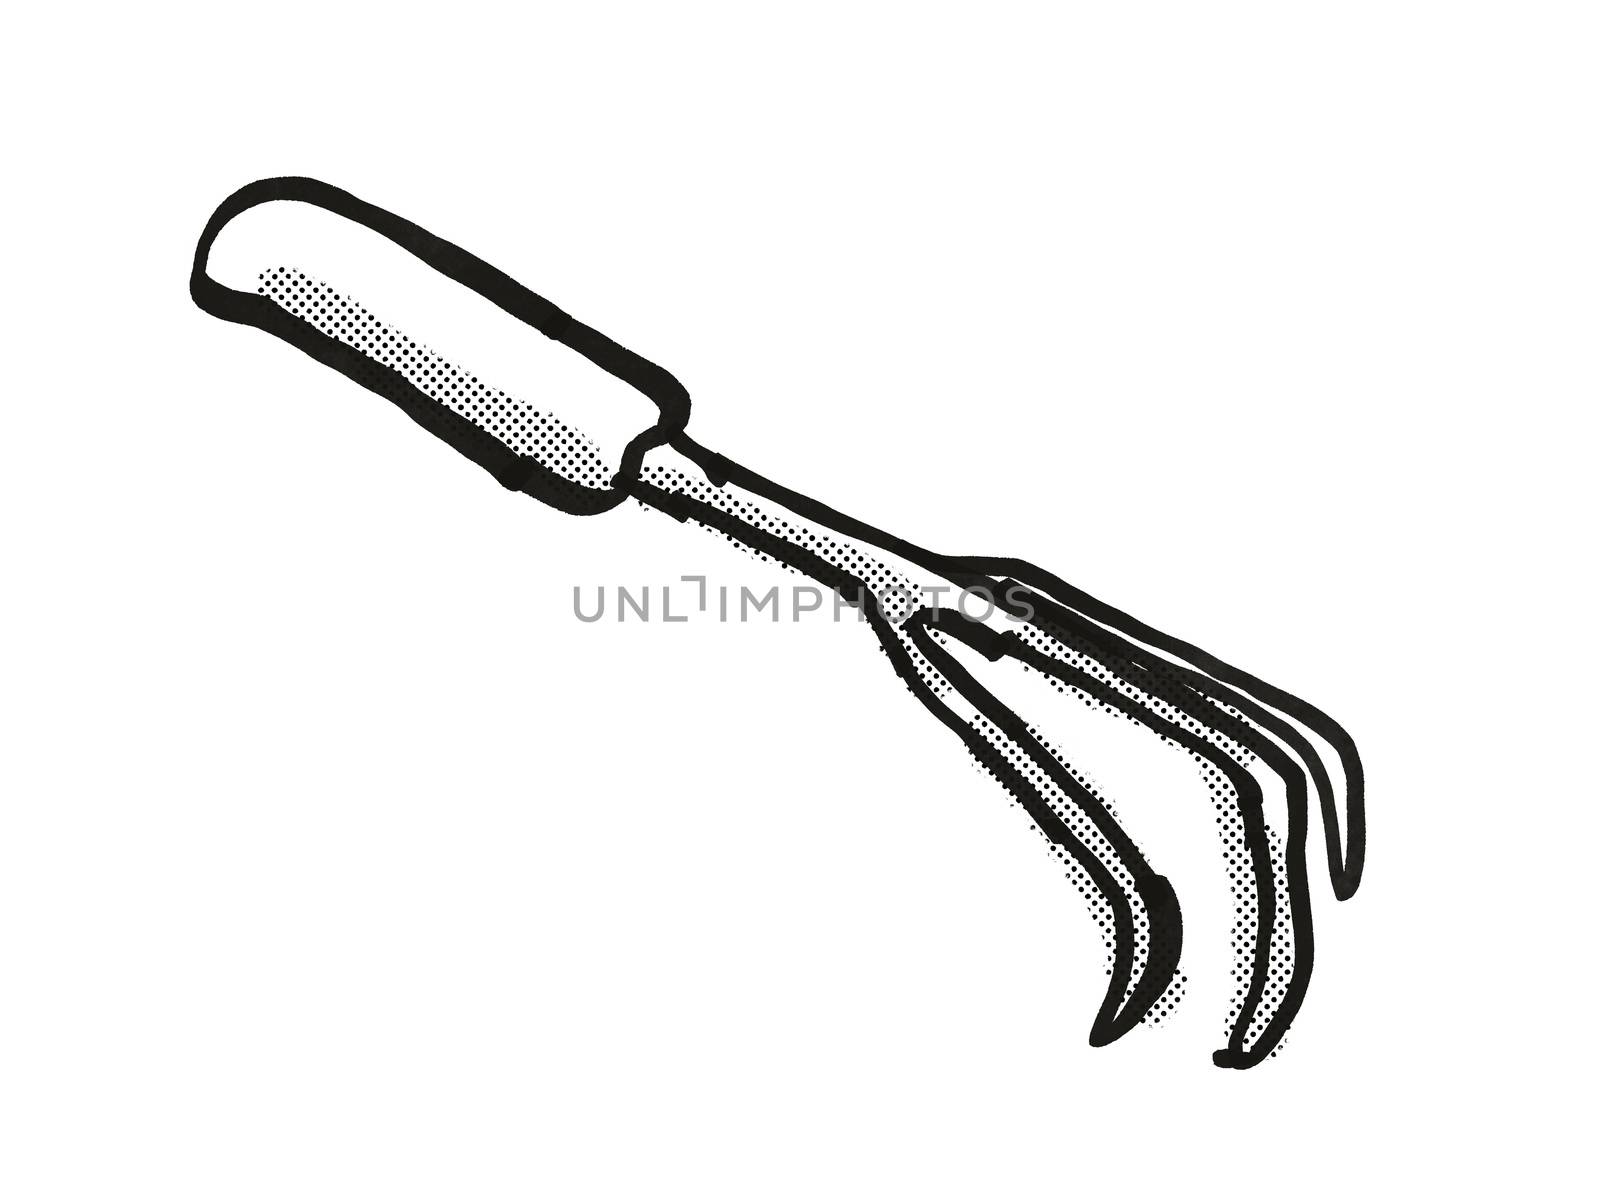 Retro cartoon style drawing of a hand cultivator , a garden or gardening tool equipment on isolated white background done in black and white